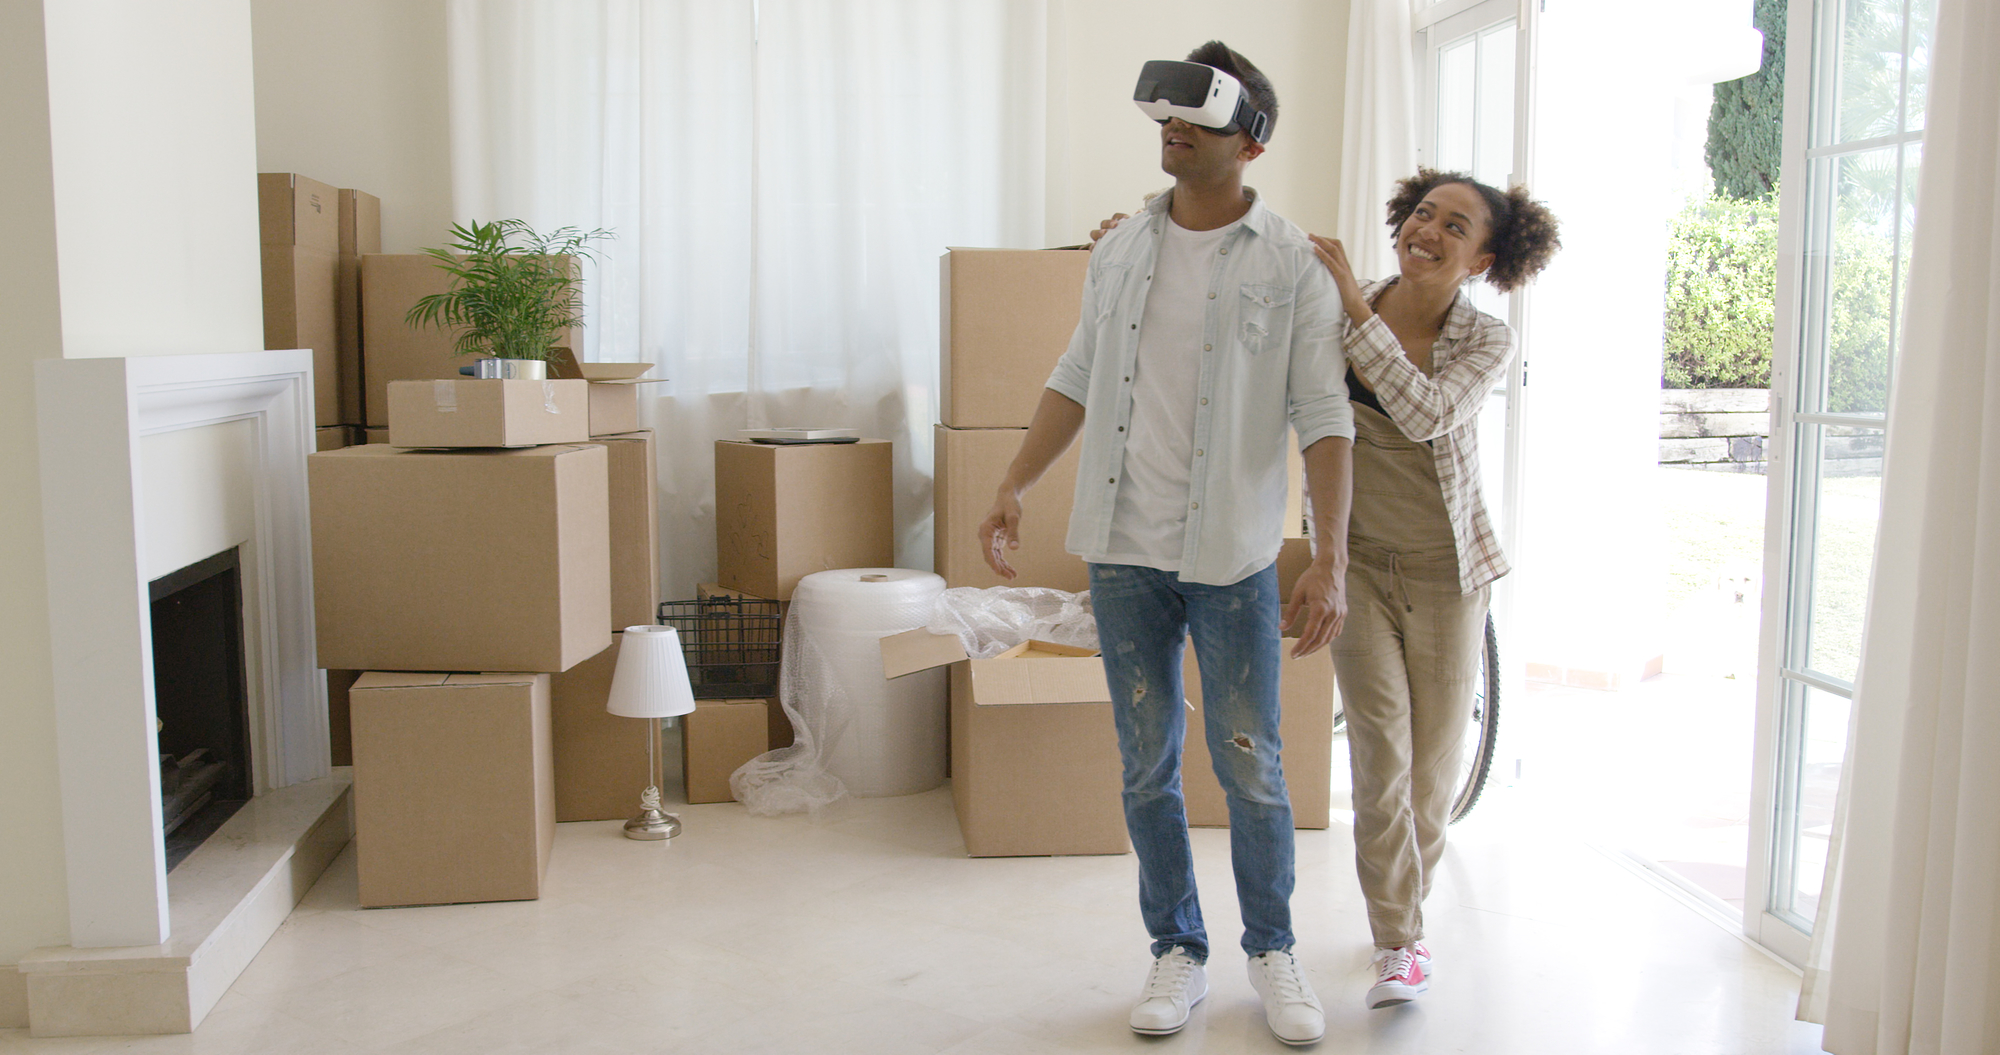 Virtual Reality Technology Will Soon Be Prevalent In Home Selling and Buying